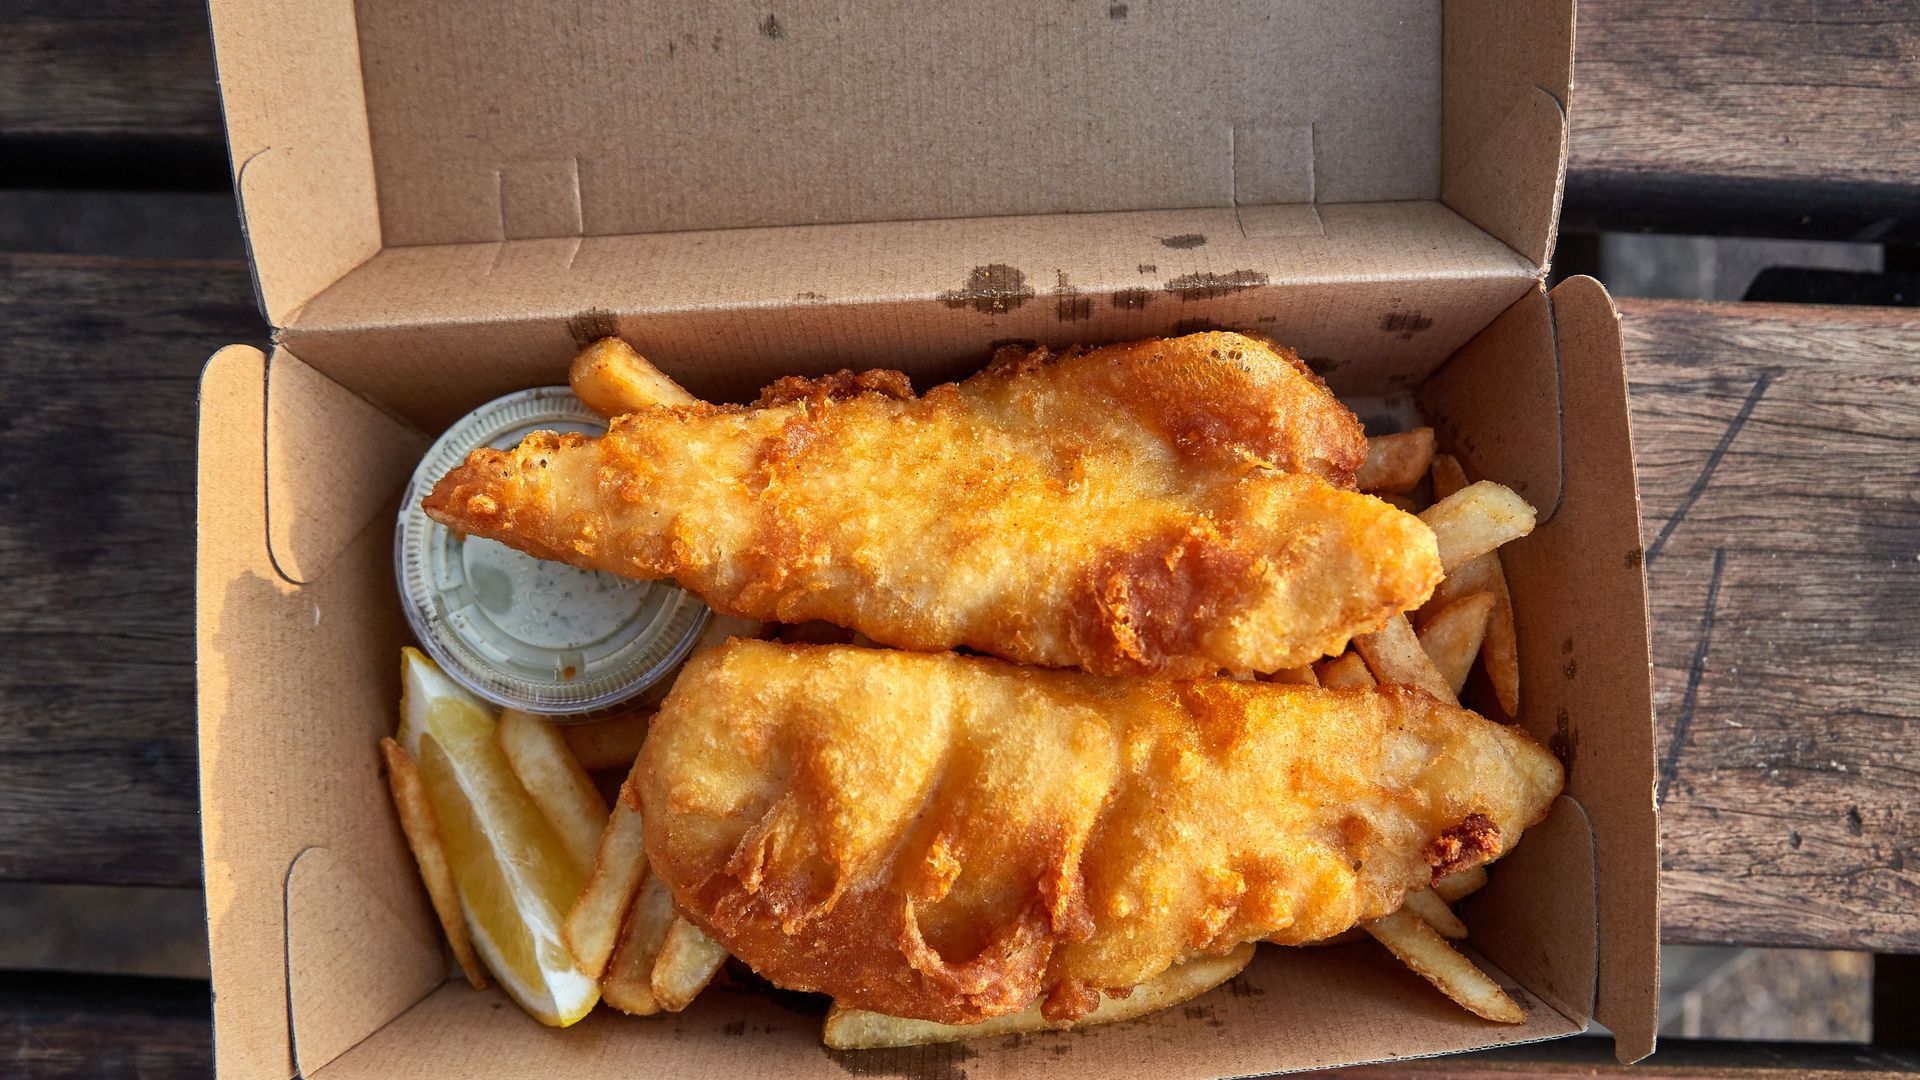 Two pieces of fish on top of fries in a cardboard box